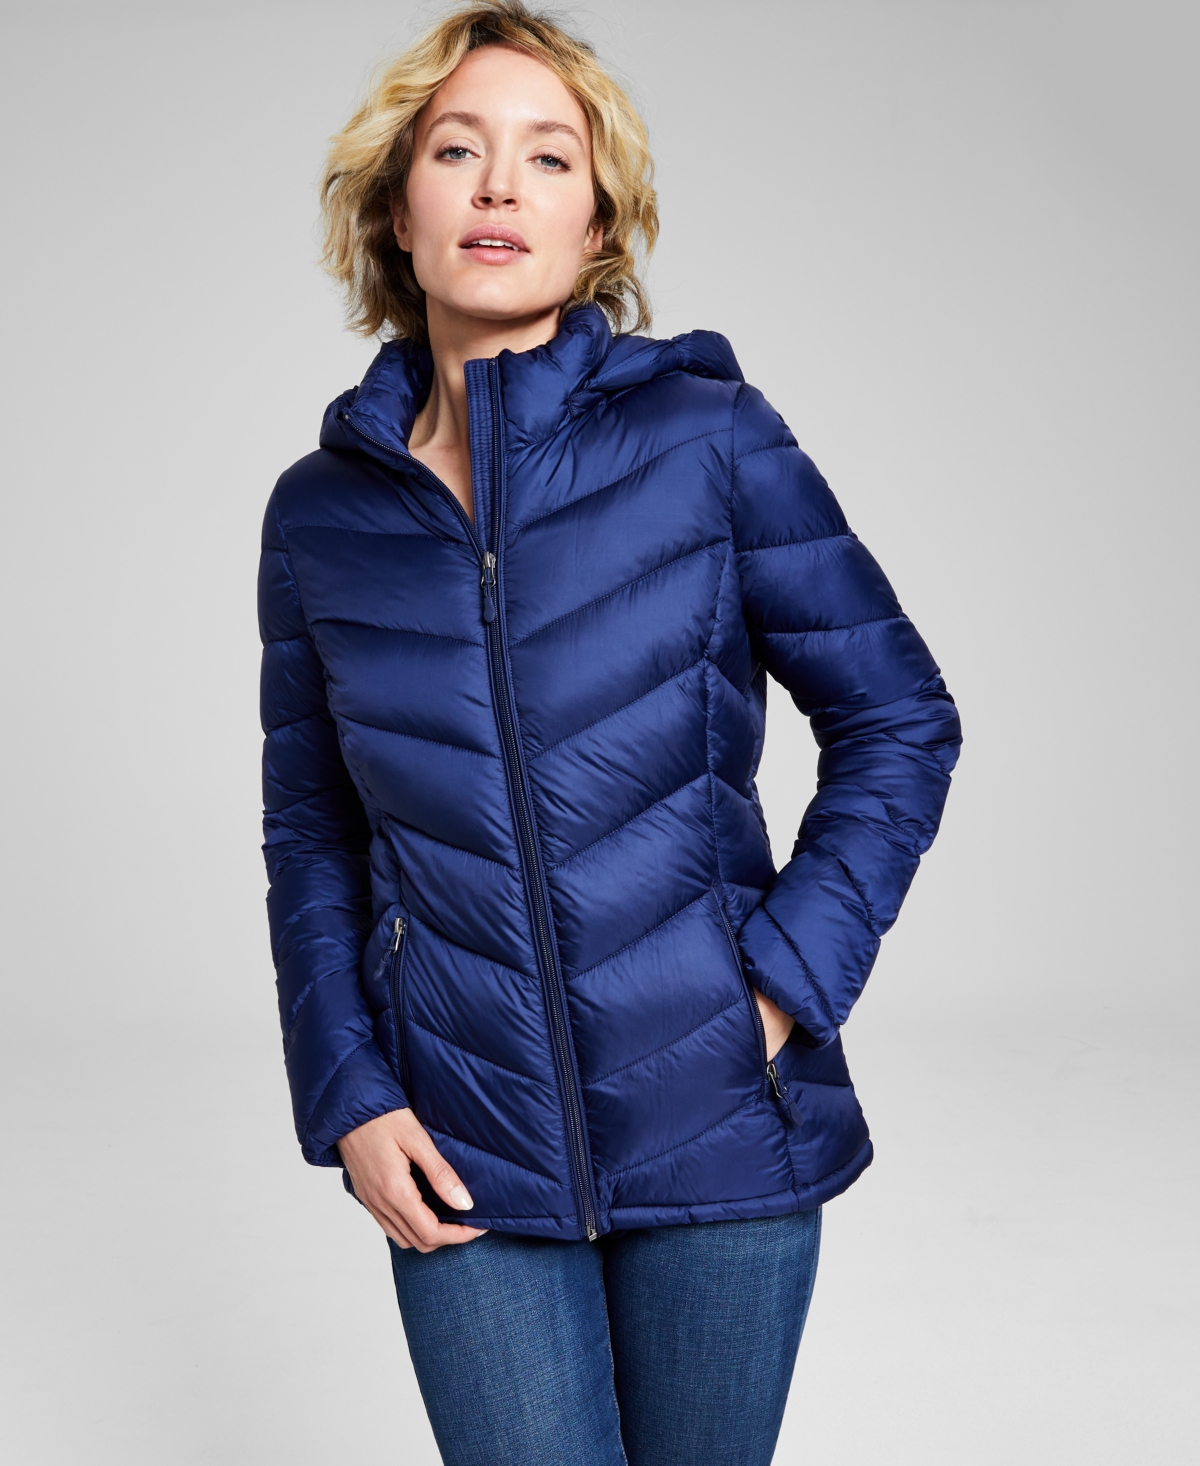 Women's Packable Hooded Puffer Coat, Created for Macy's - Black